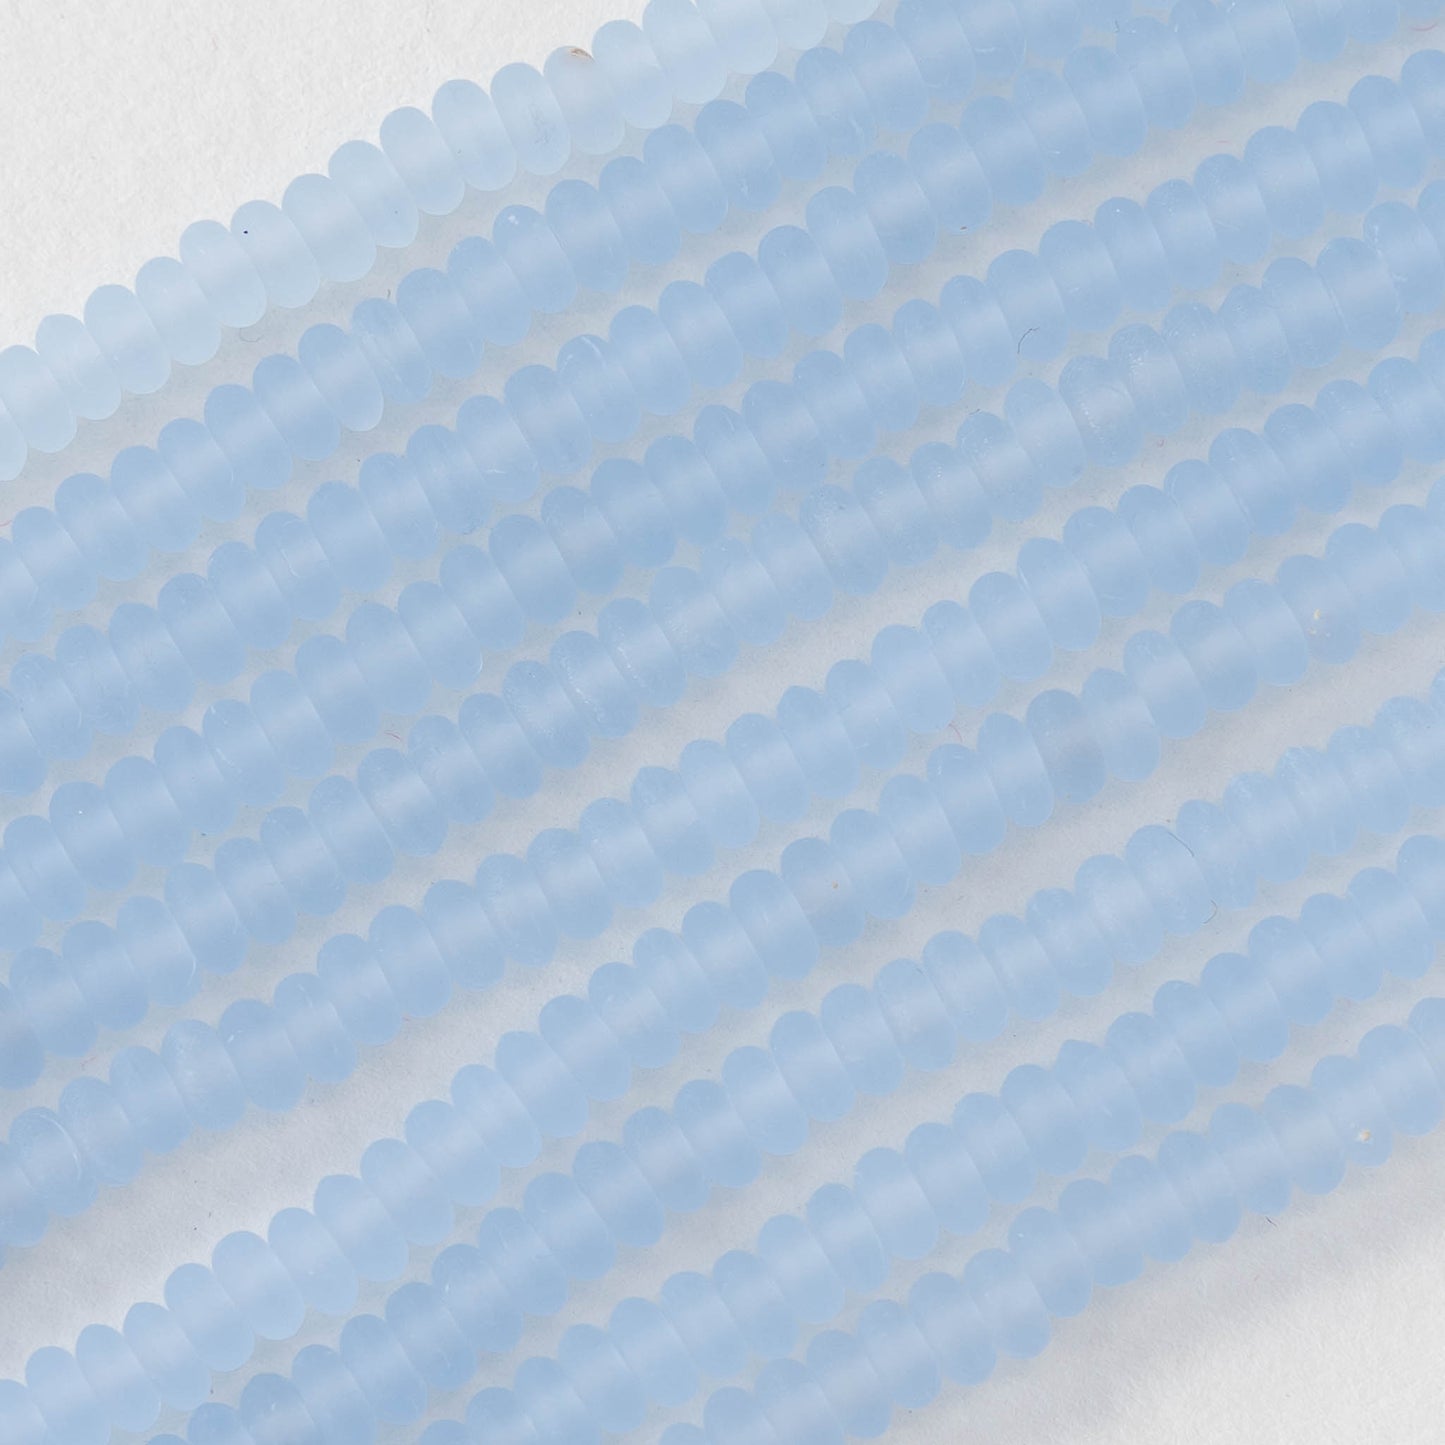 Load image into Gallery viewer, 4mm Rondelle Beads - Sky Blue Matte - 100 beads
